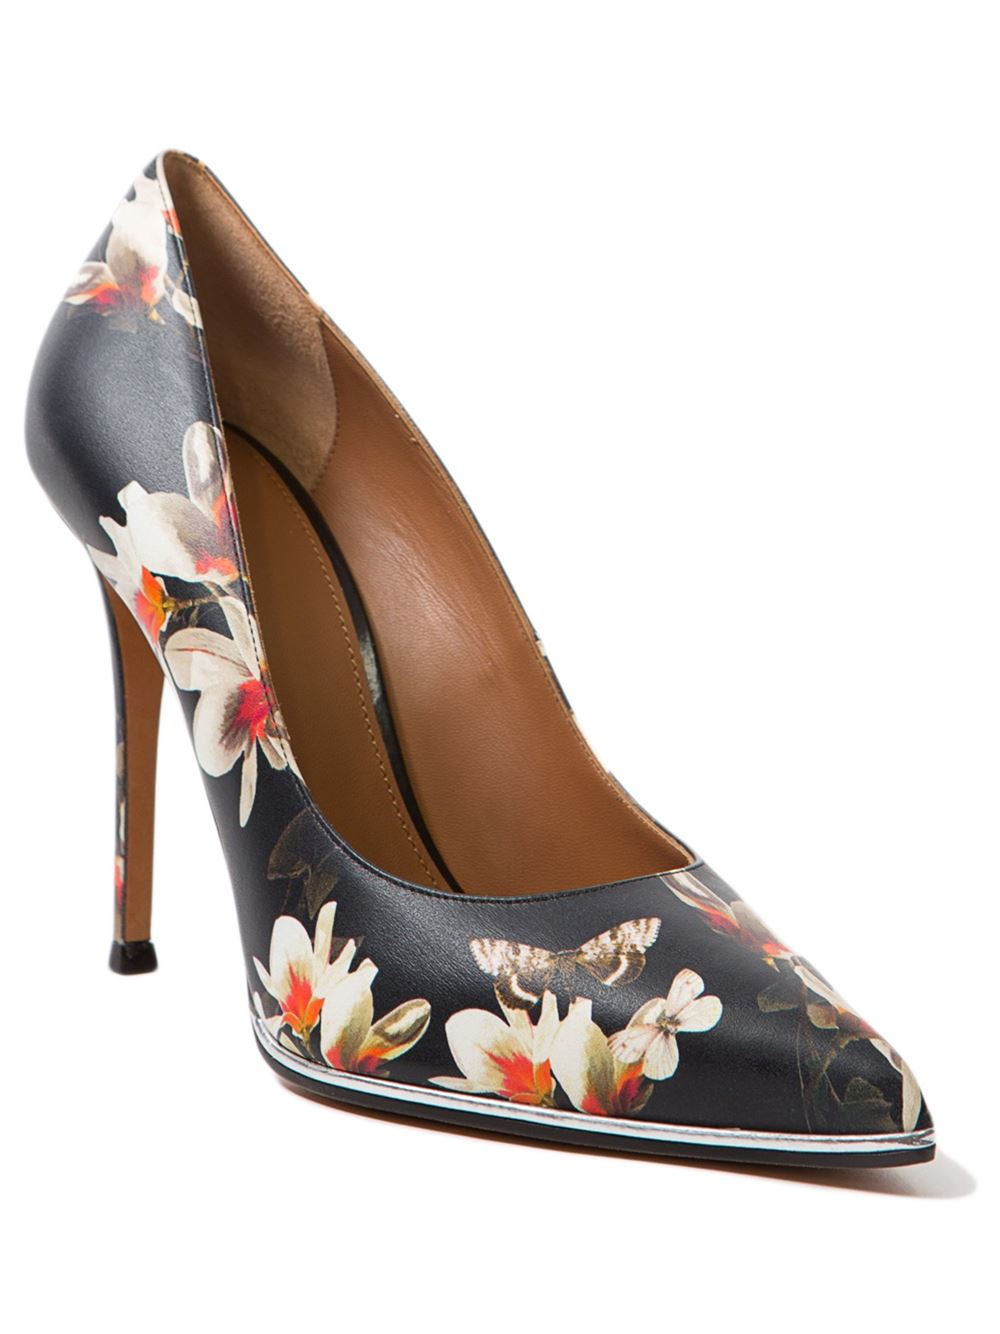 Givenchy Floral-Print Leather Pumps in Floral (black) | Lyst